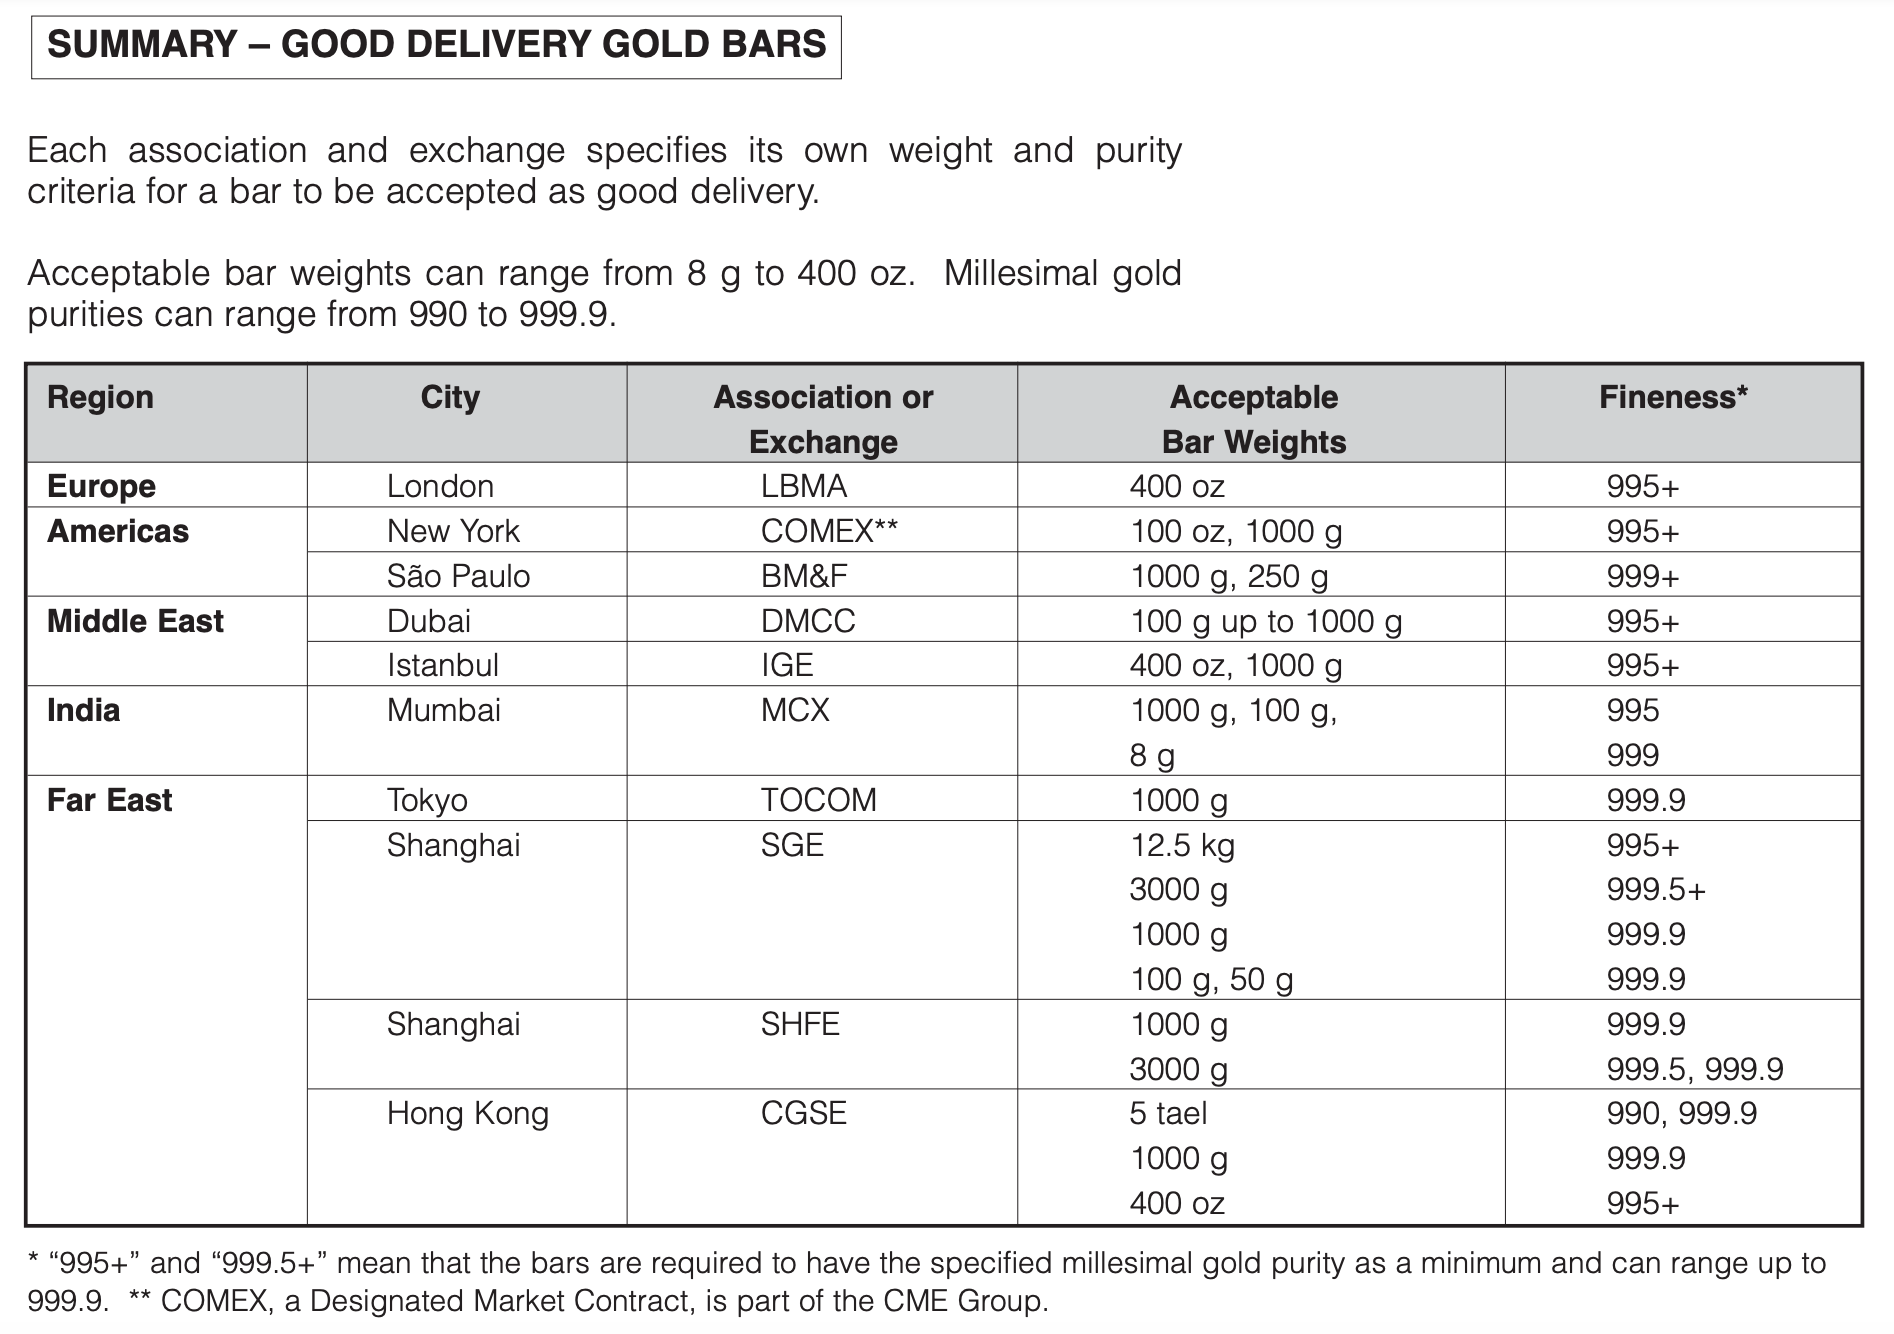 Good Delivery Gold bar